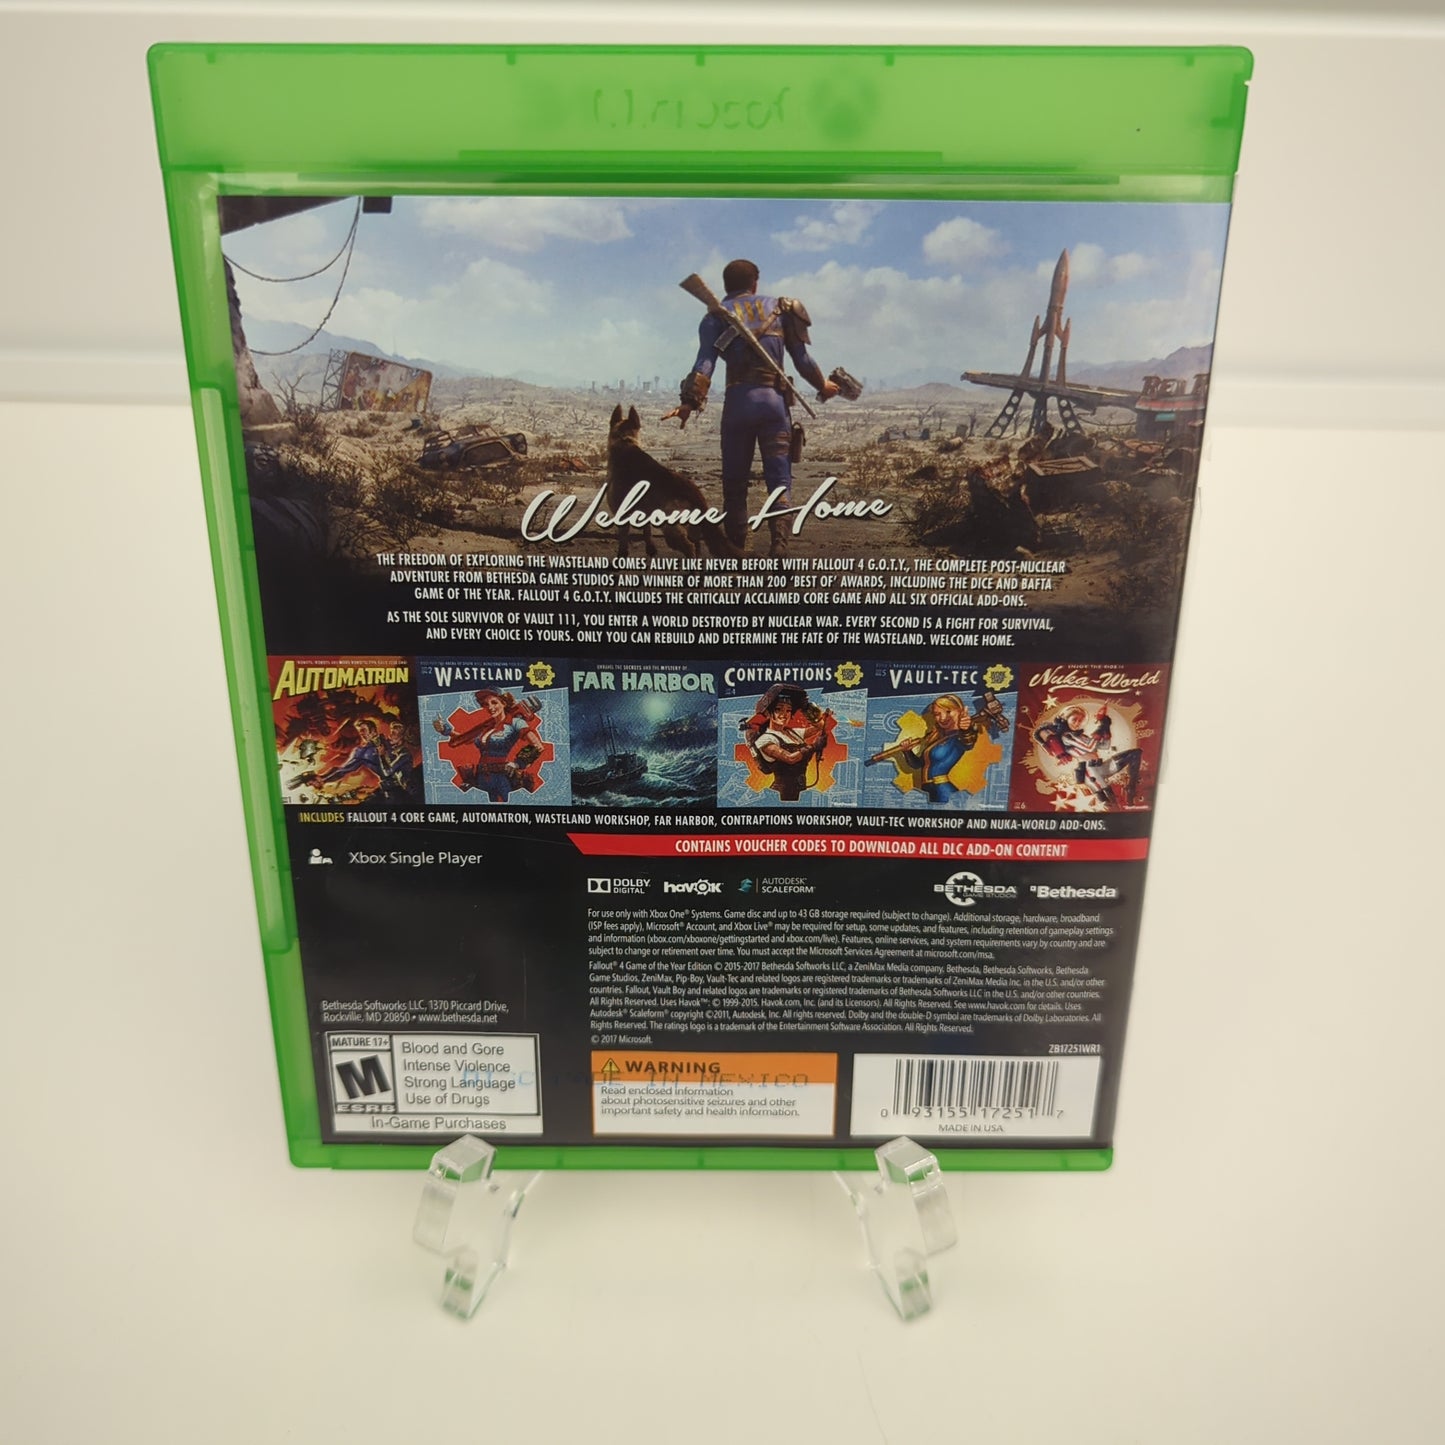 Fallout 4 - Xbox One